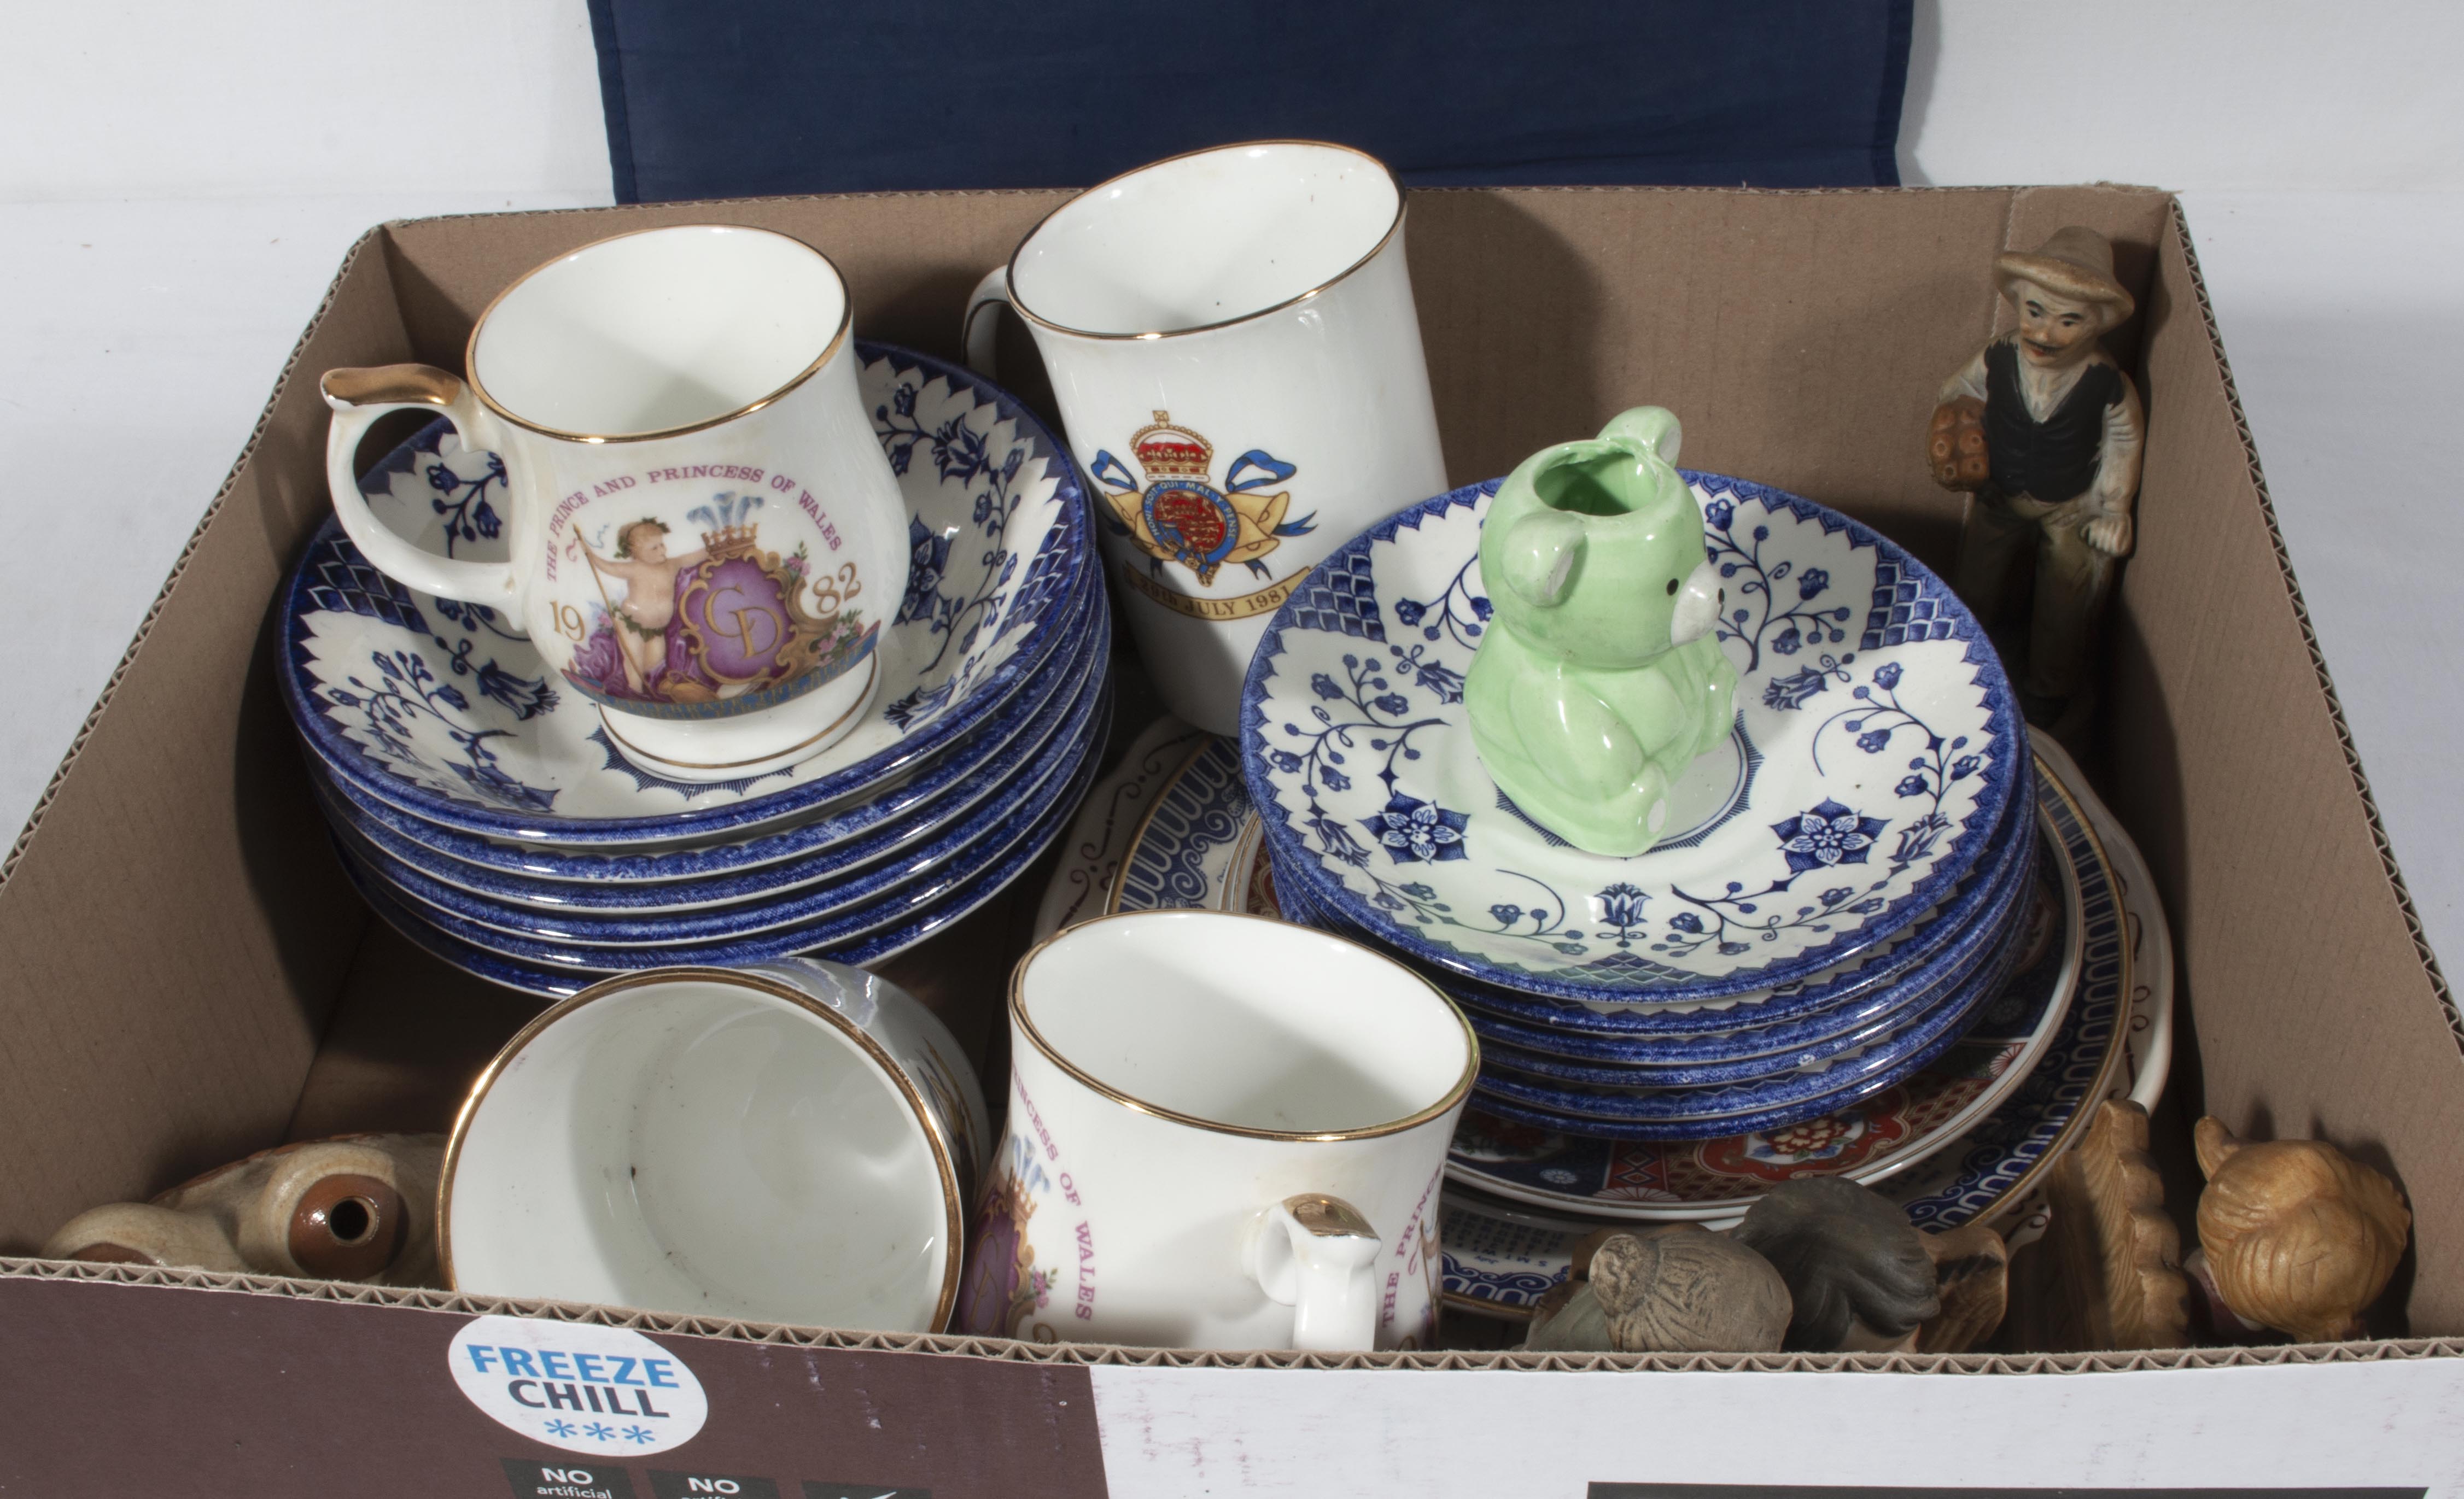 A box containing china and pottery